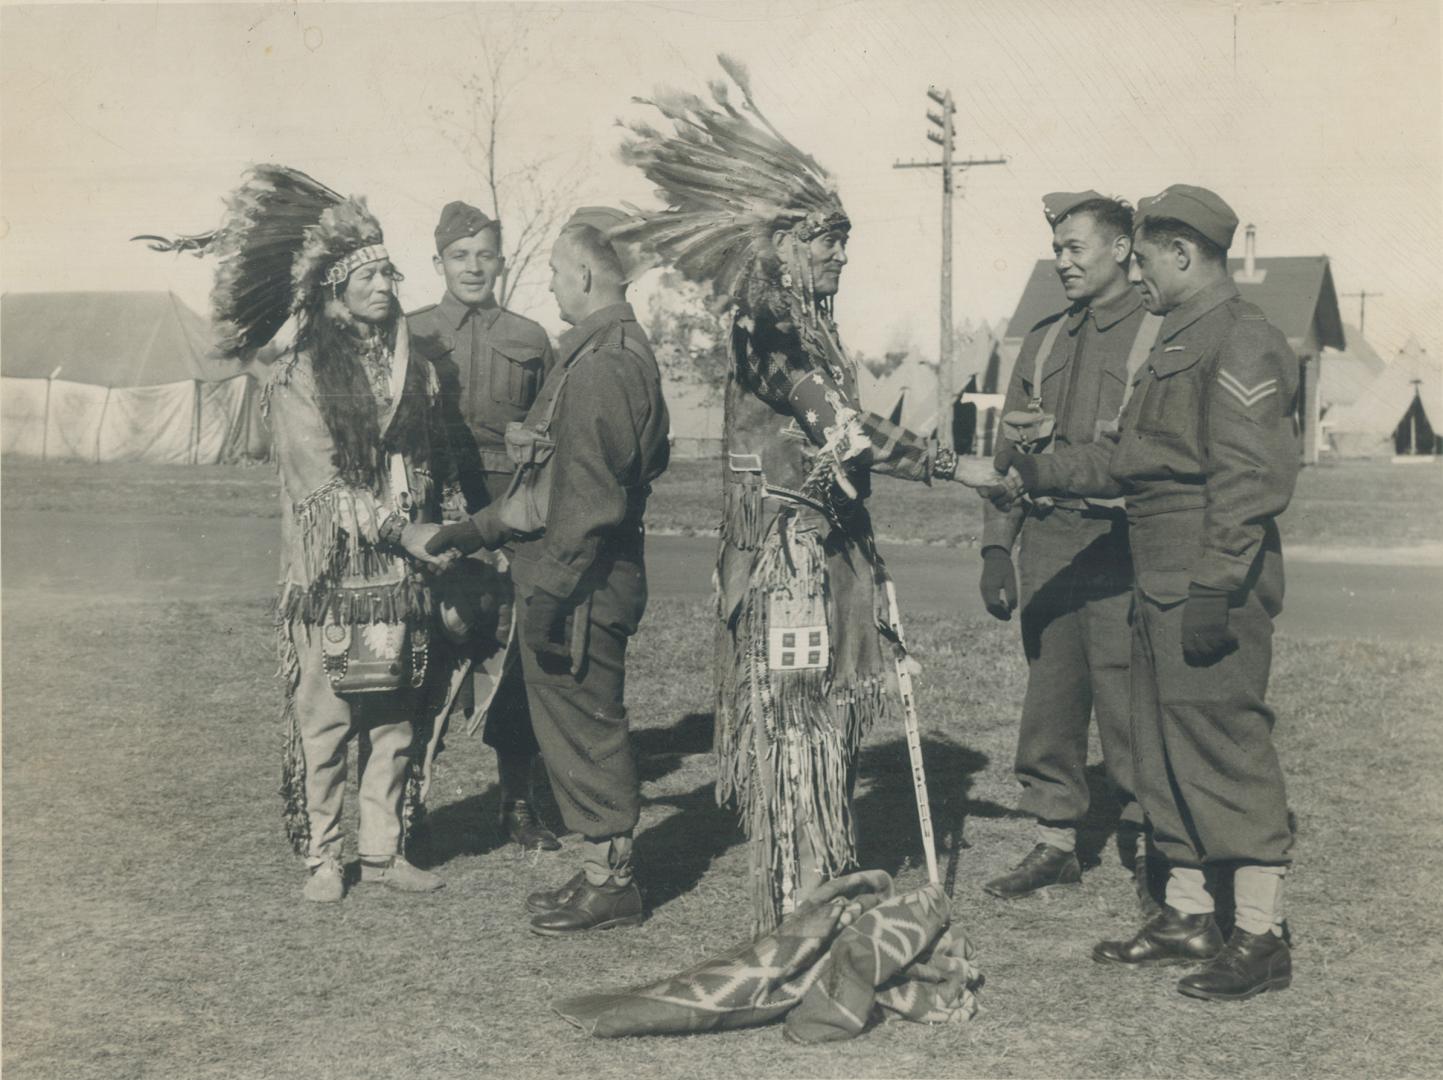 They're in the army now, but Indians of the Six Nations are still subject to patriarchal supervision of their tribal leaders. Here Chief Black Cloud a(...)